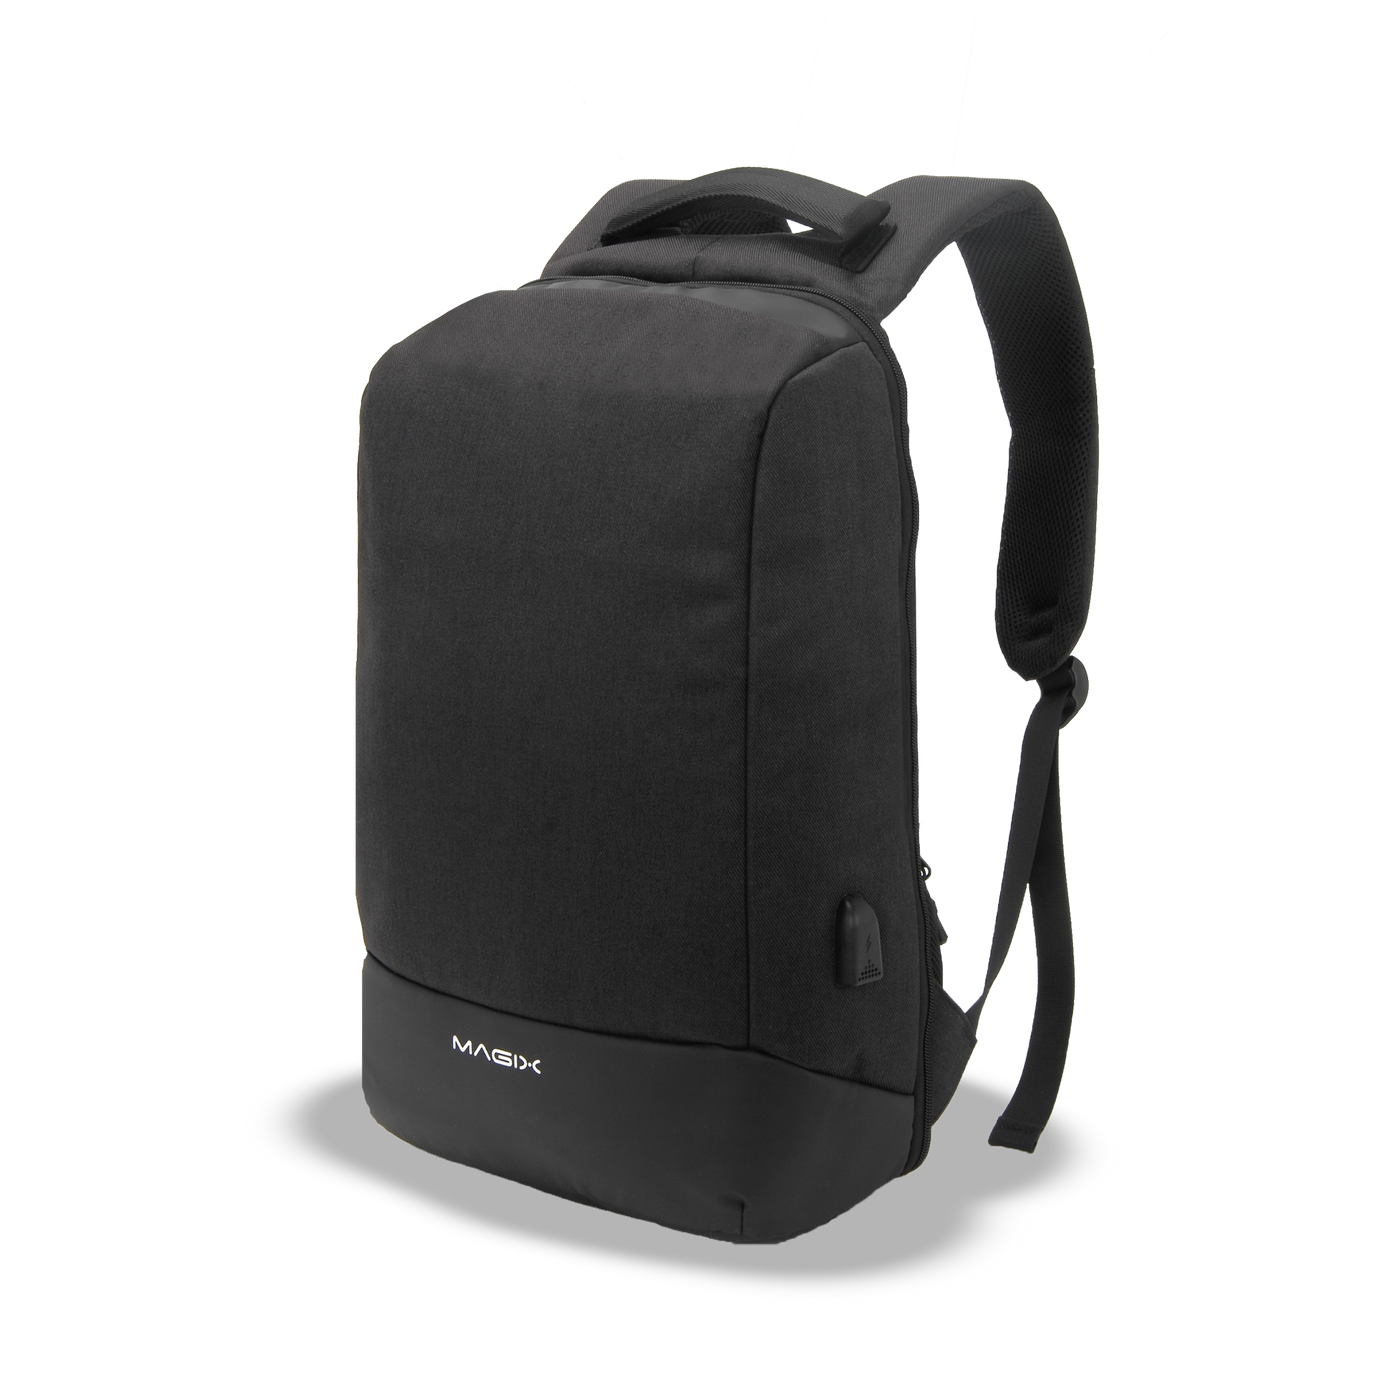 MAGIX 17" Chrome Laptop Backpack with Internal Pocket